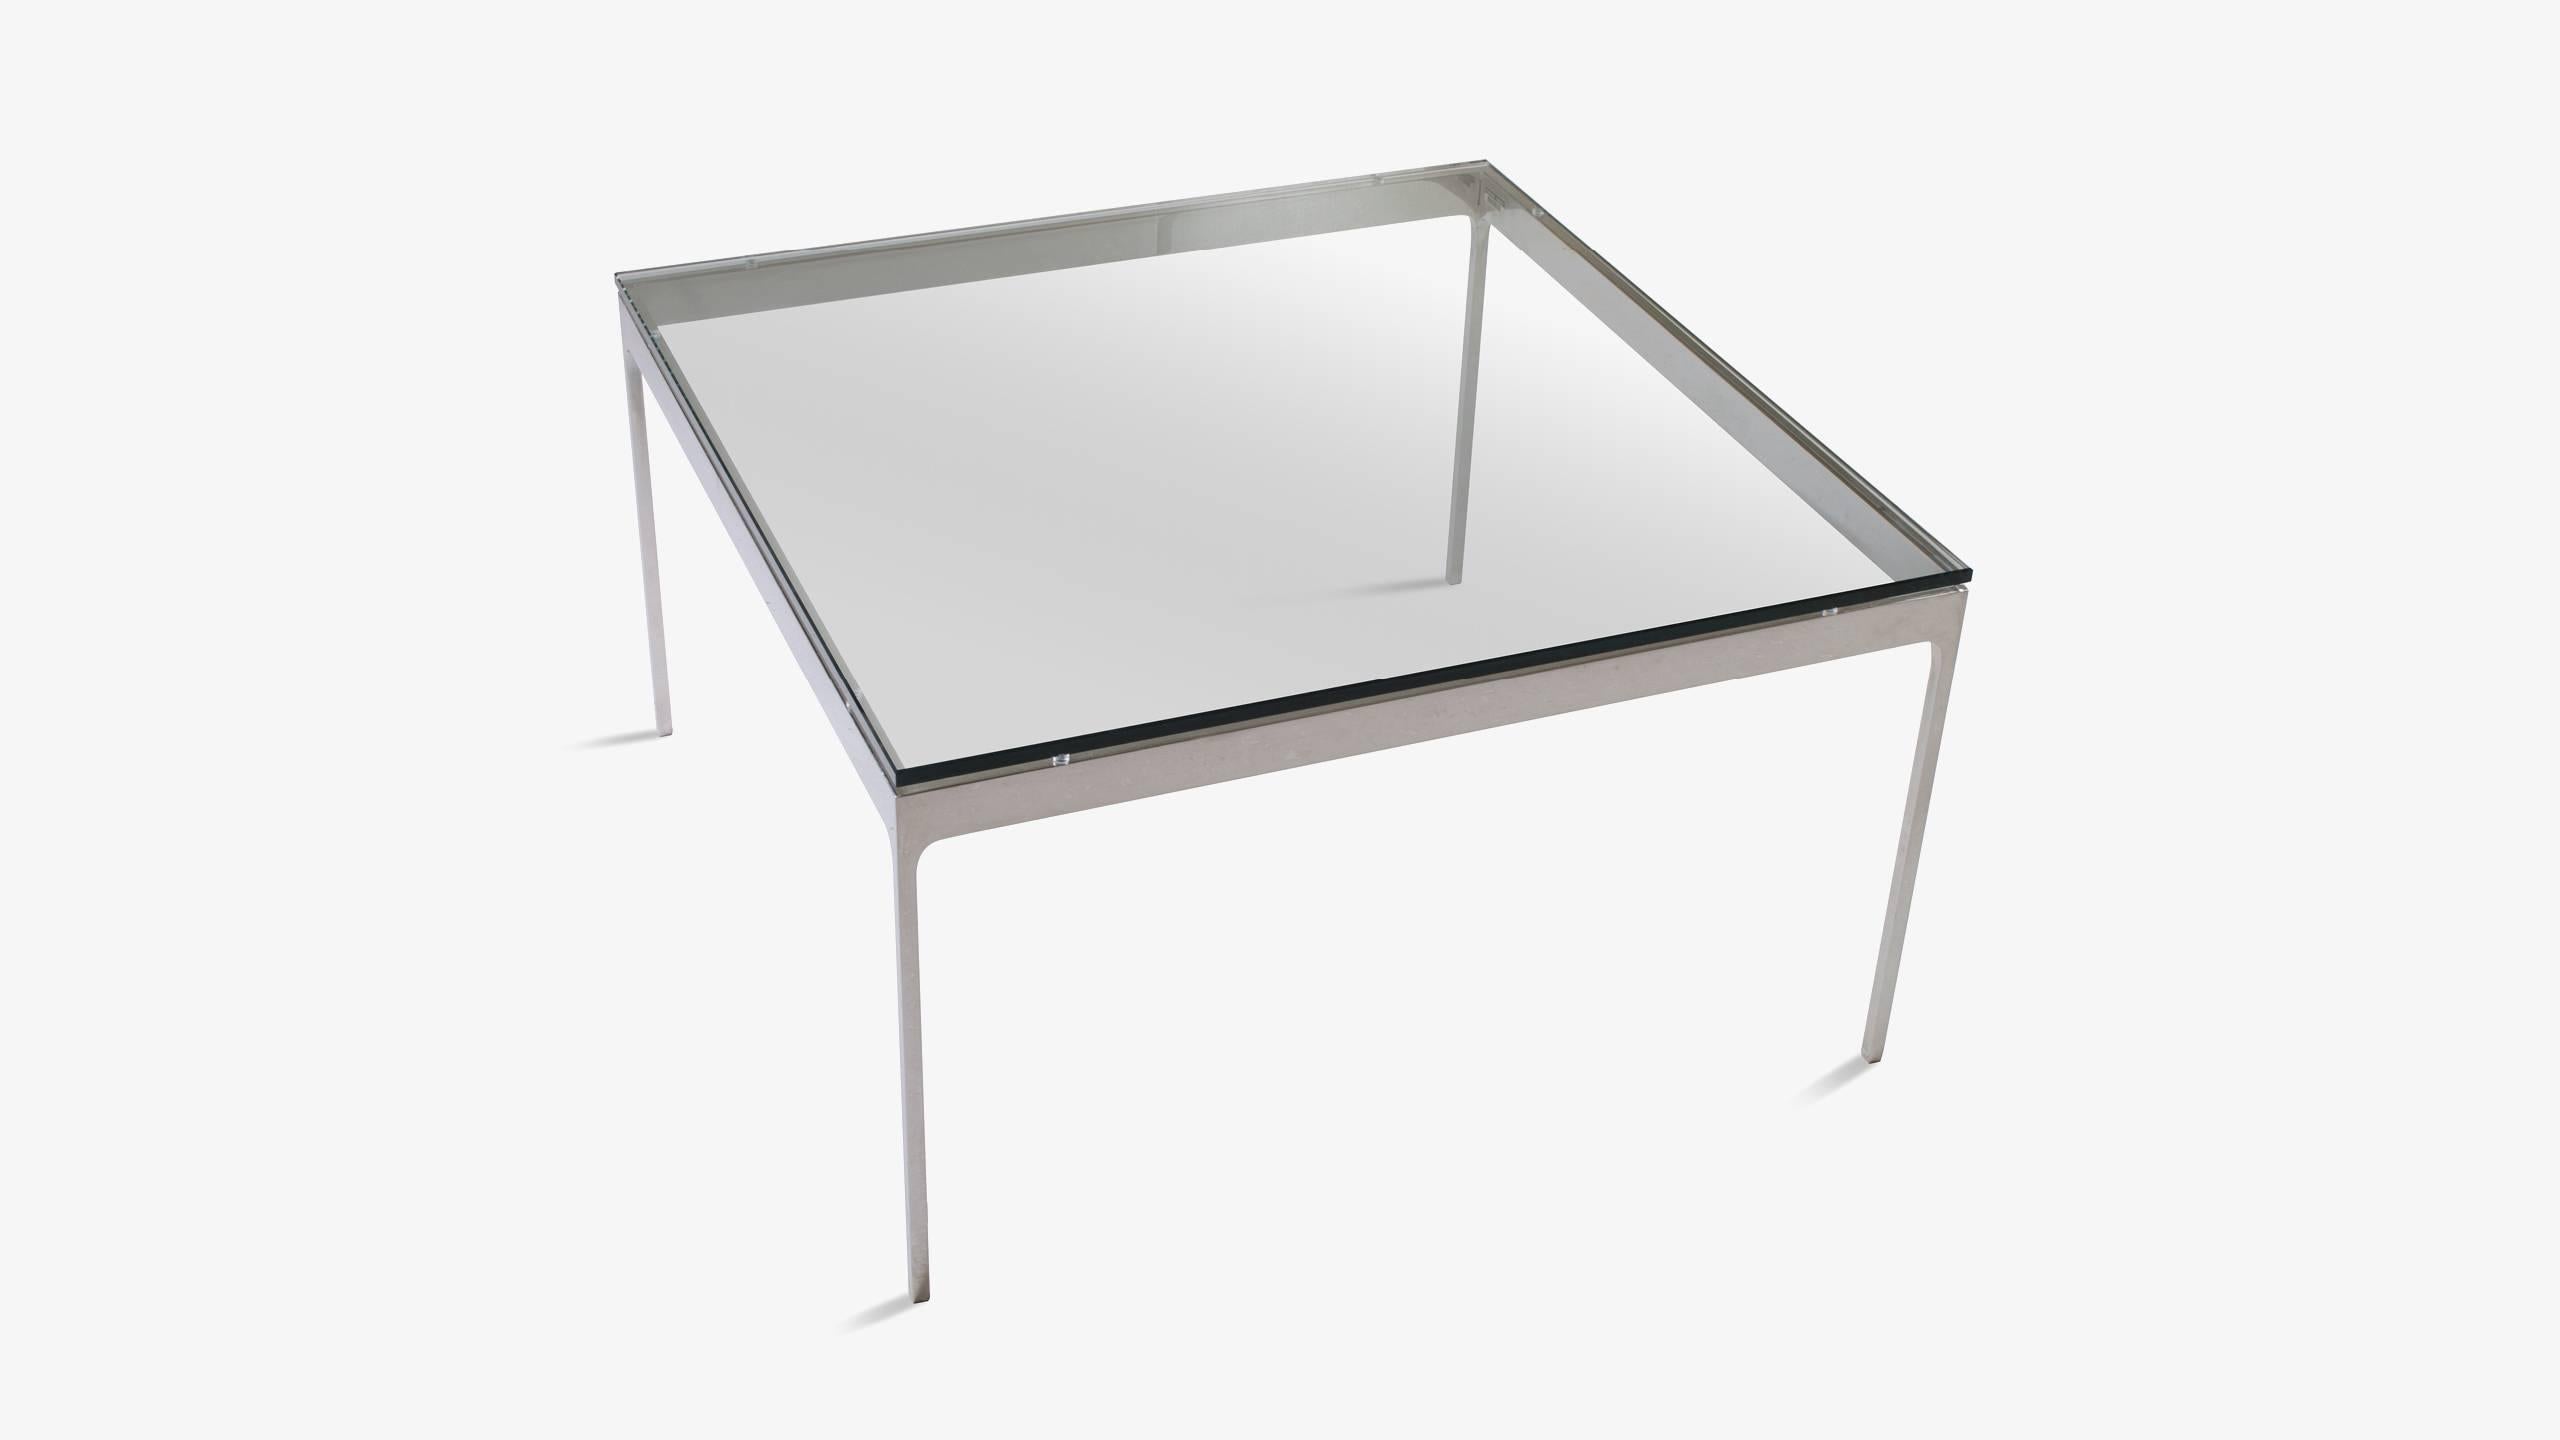 American Minimalist Stainless Steel Cocktail Table by Nicos Zographos